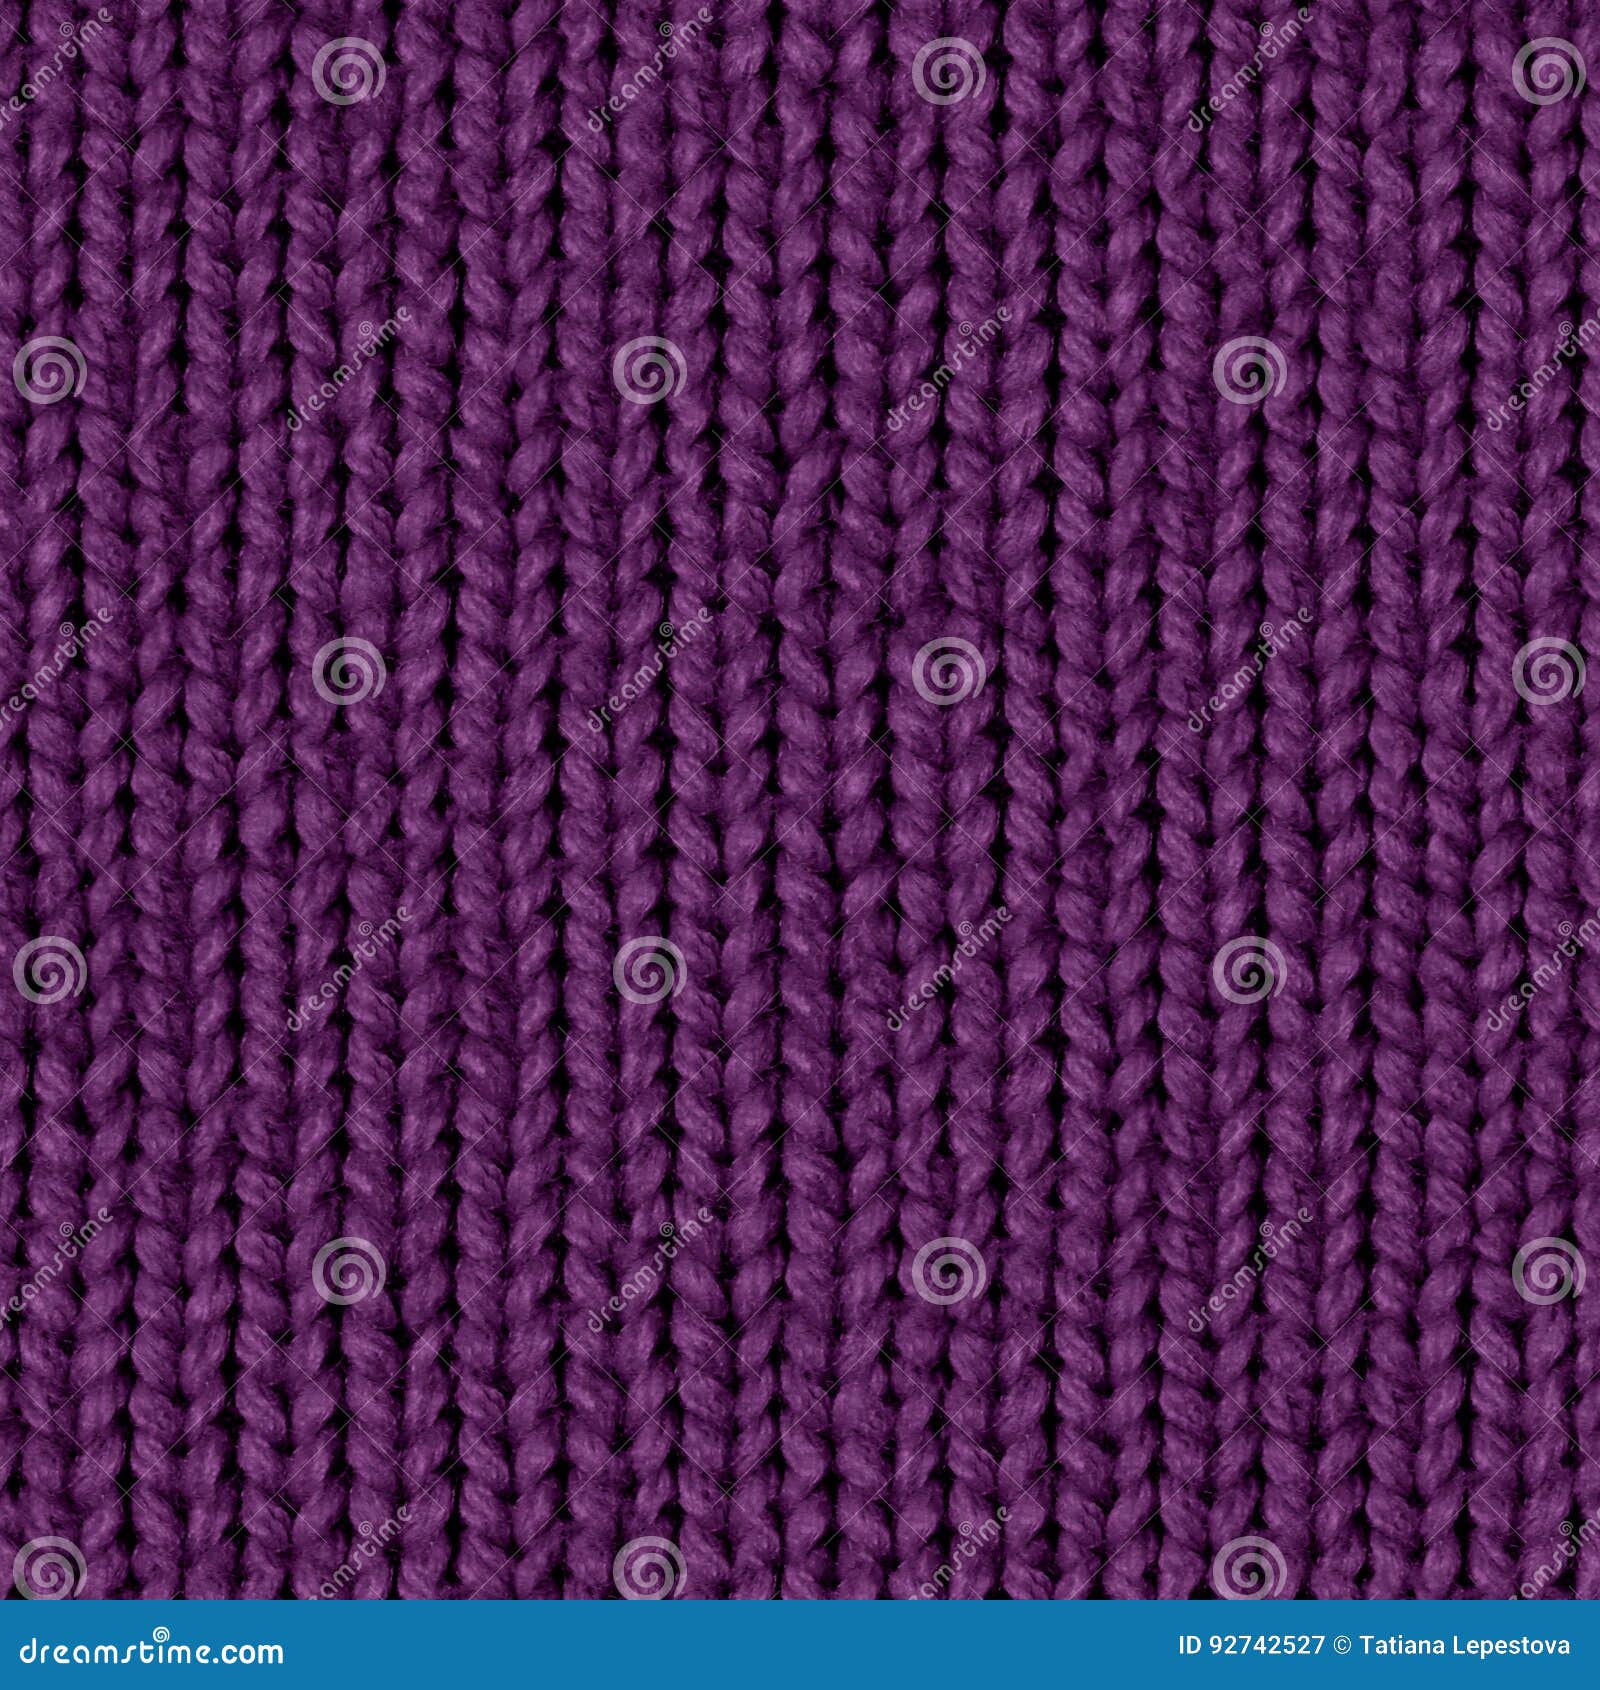 fabric texture 7 diffuse seamless map. dark violet.